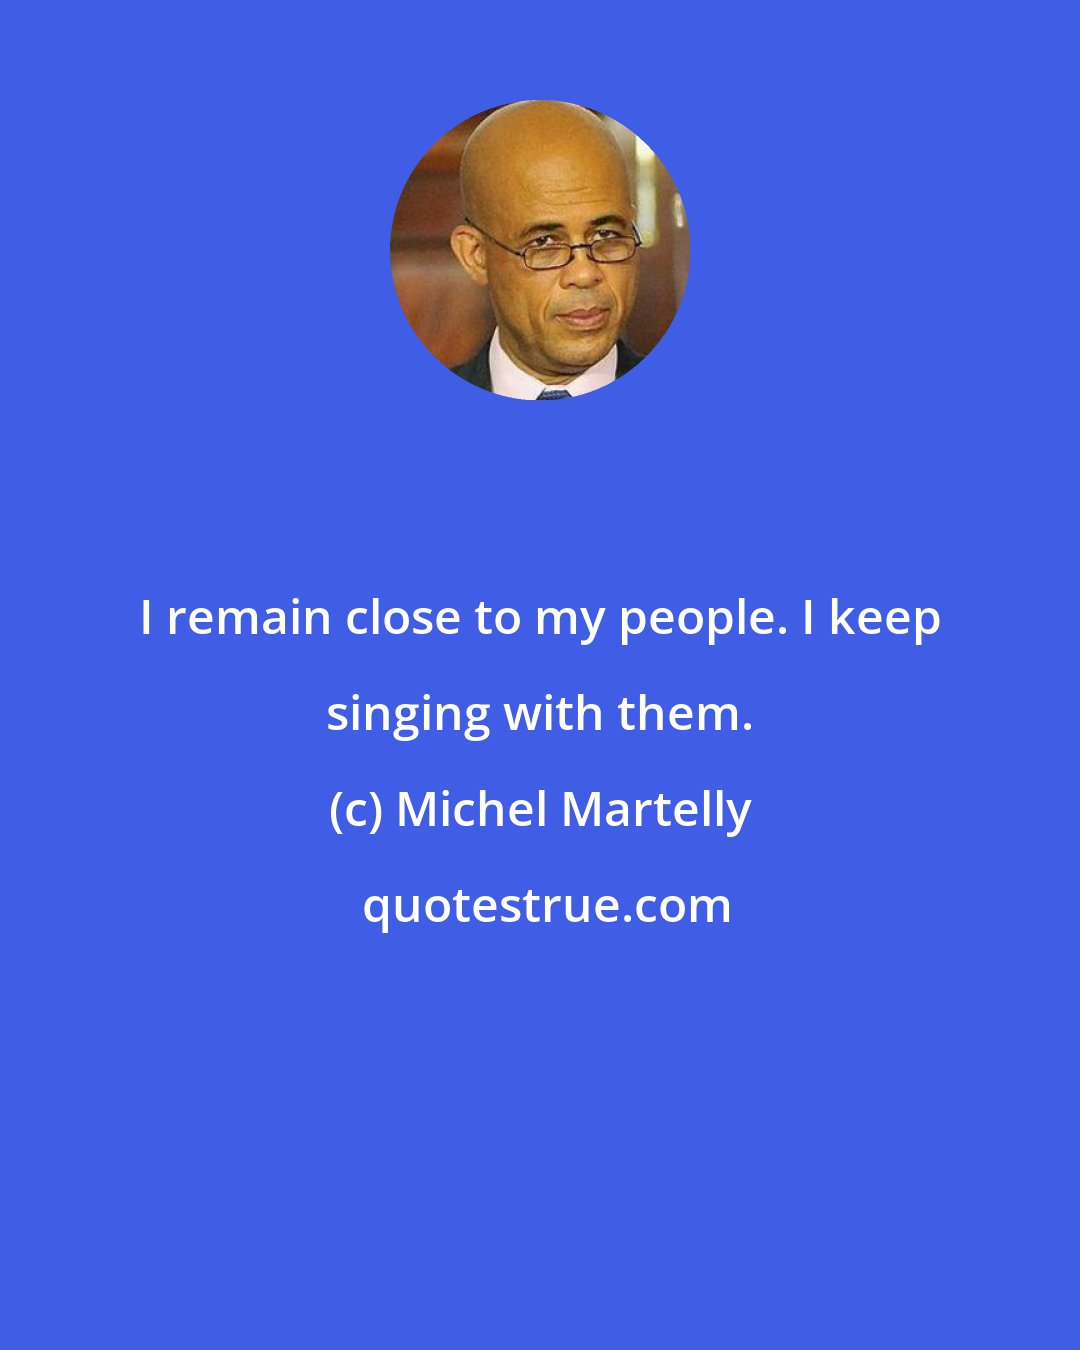 Michel Martelly: I remain close to my people. I keep singing with them.